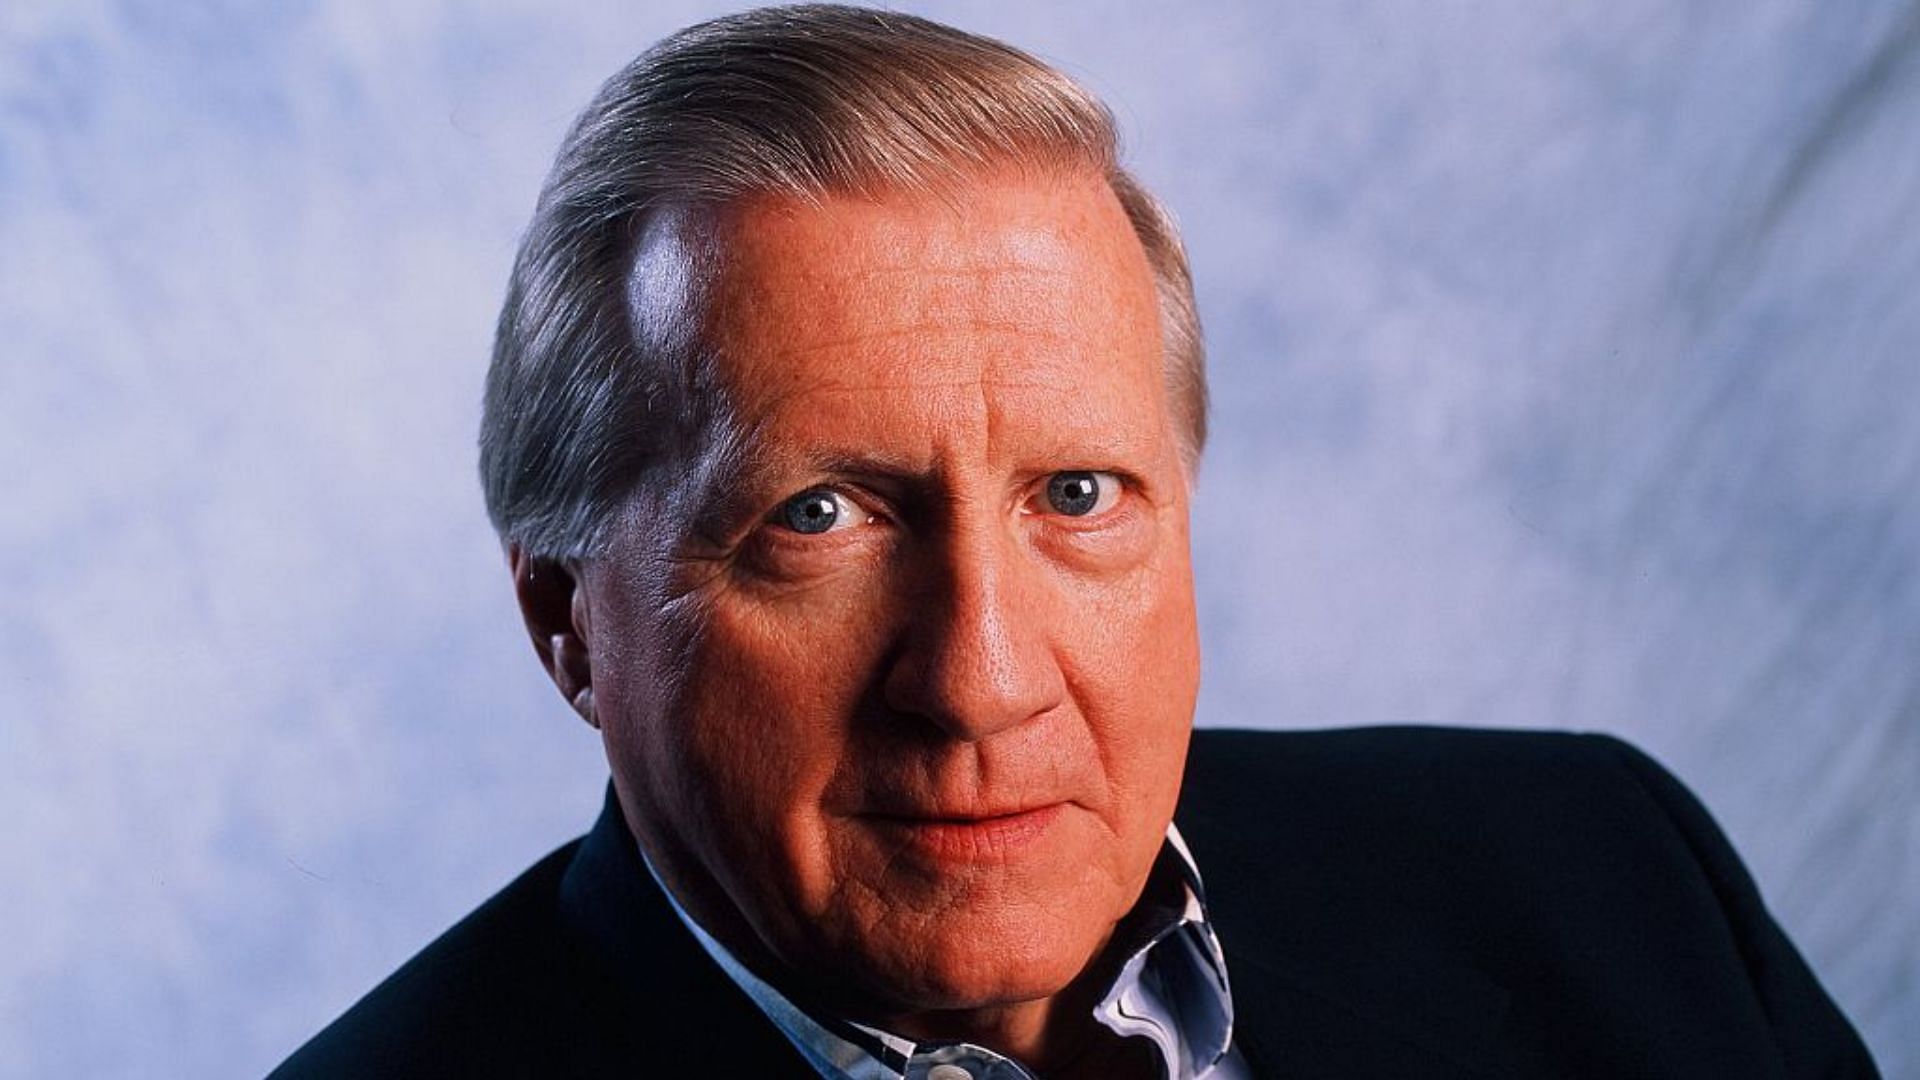 George Steinbrenner, late owner of the New York Yankees